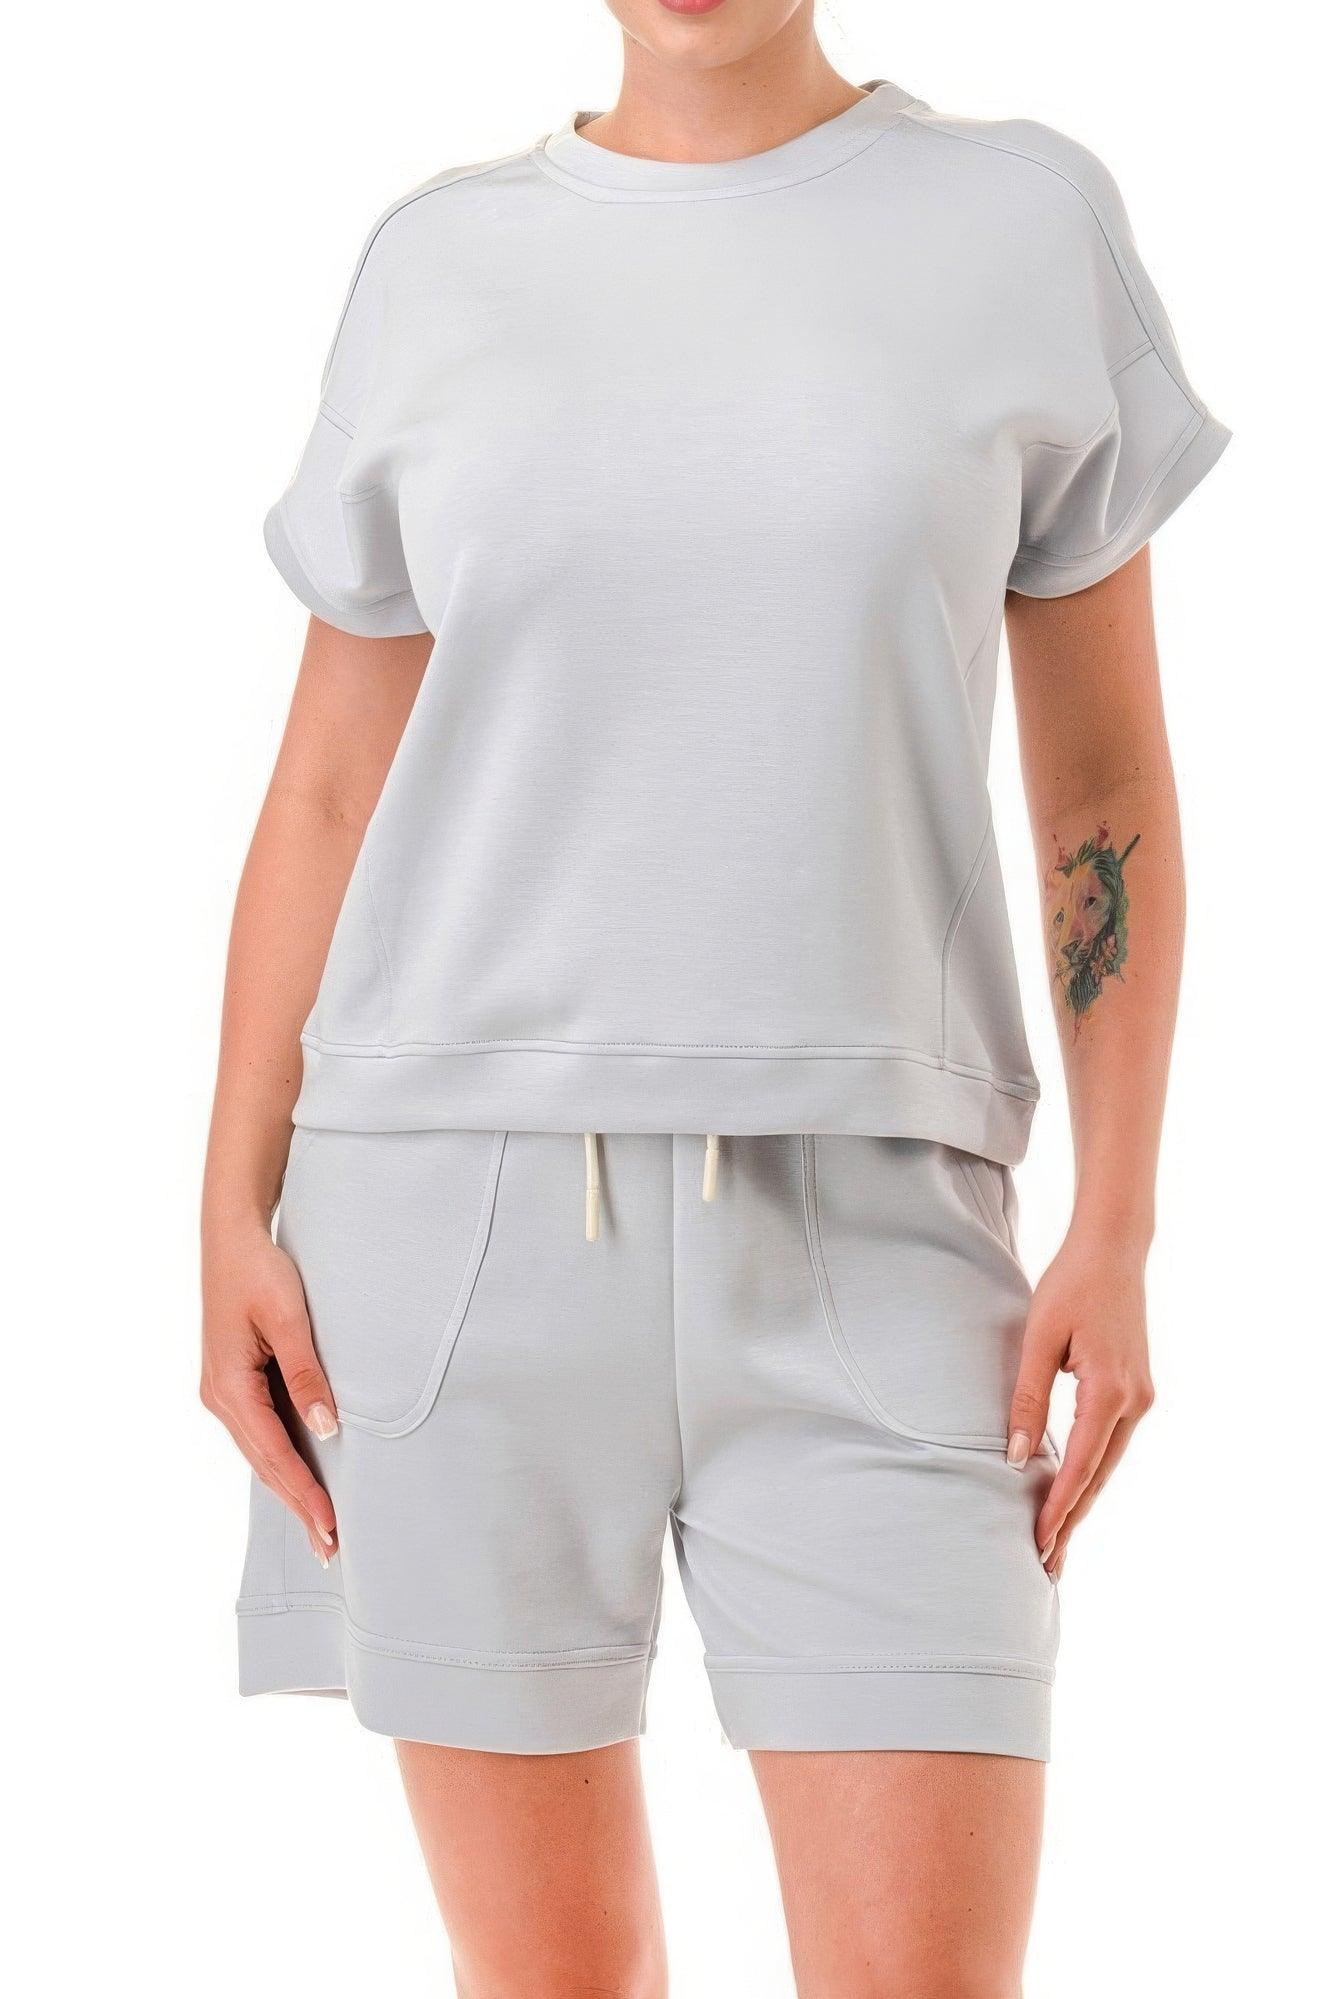 Women's Activewear Air Cotton Monochrome Tee And Shorts Set